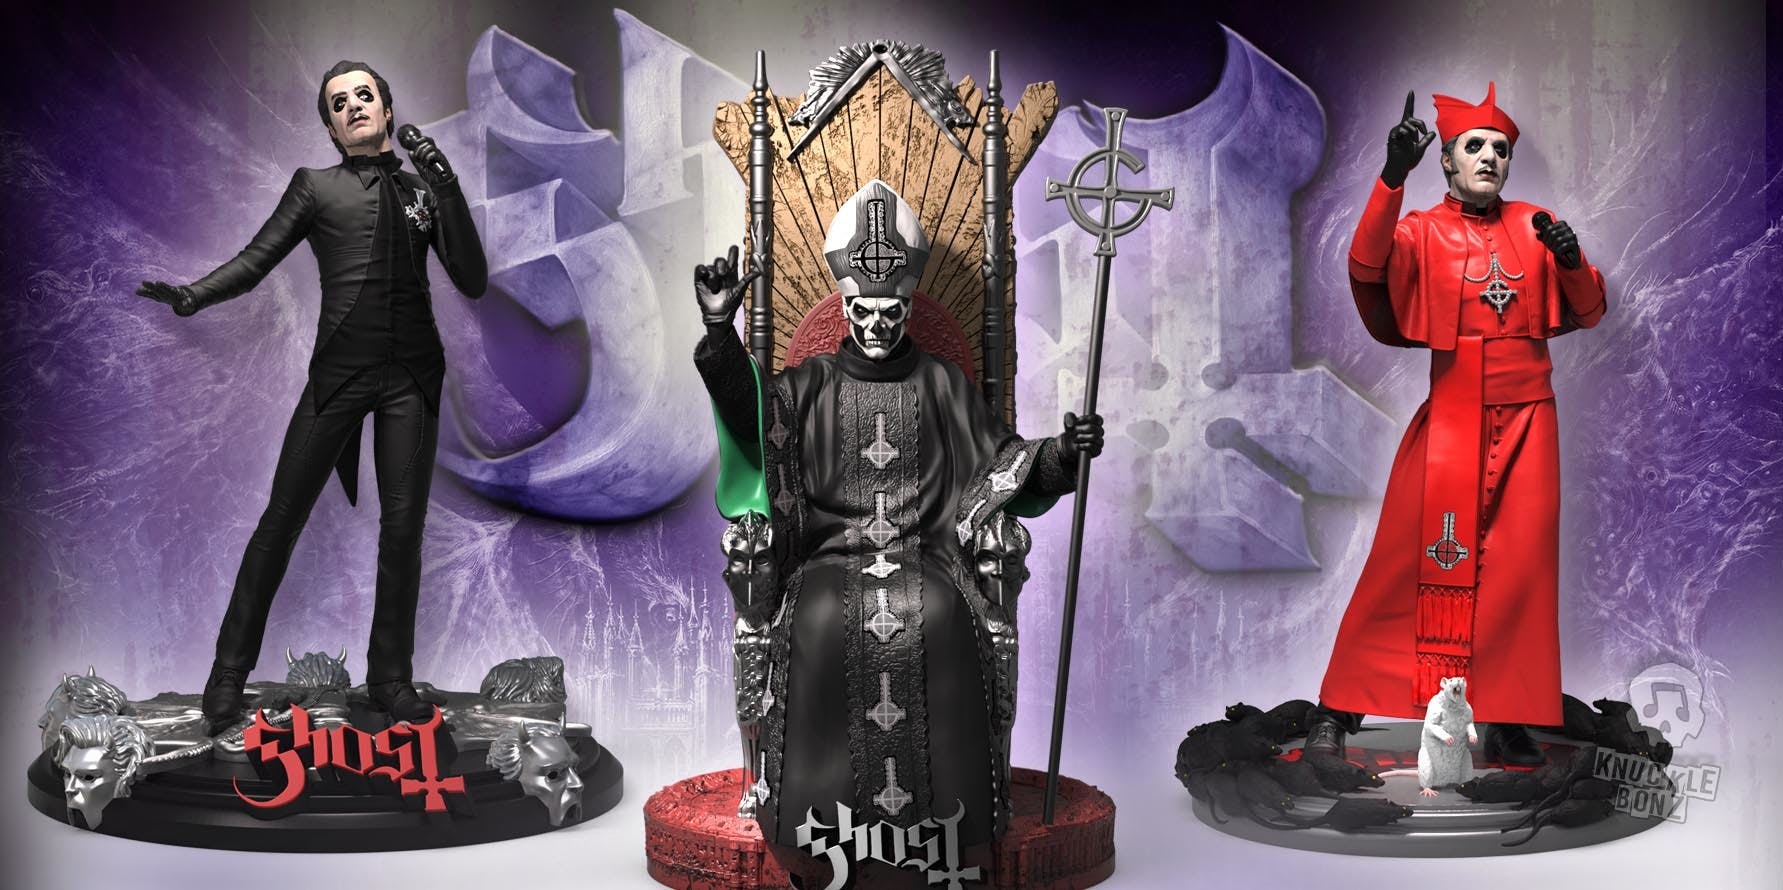 Can You Afford These New Ghost Action Figures?